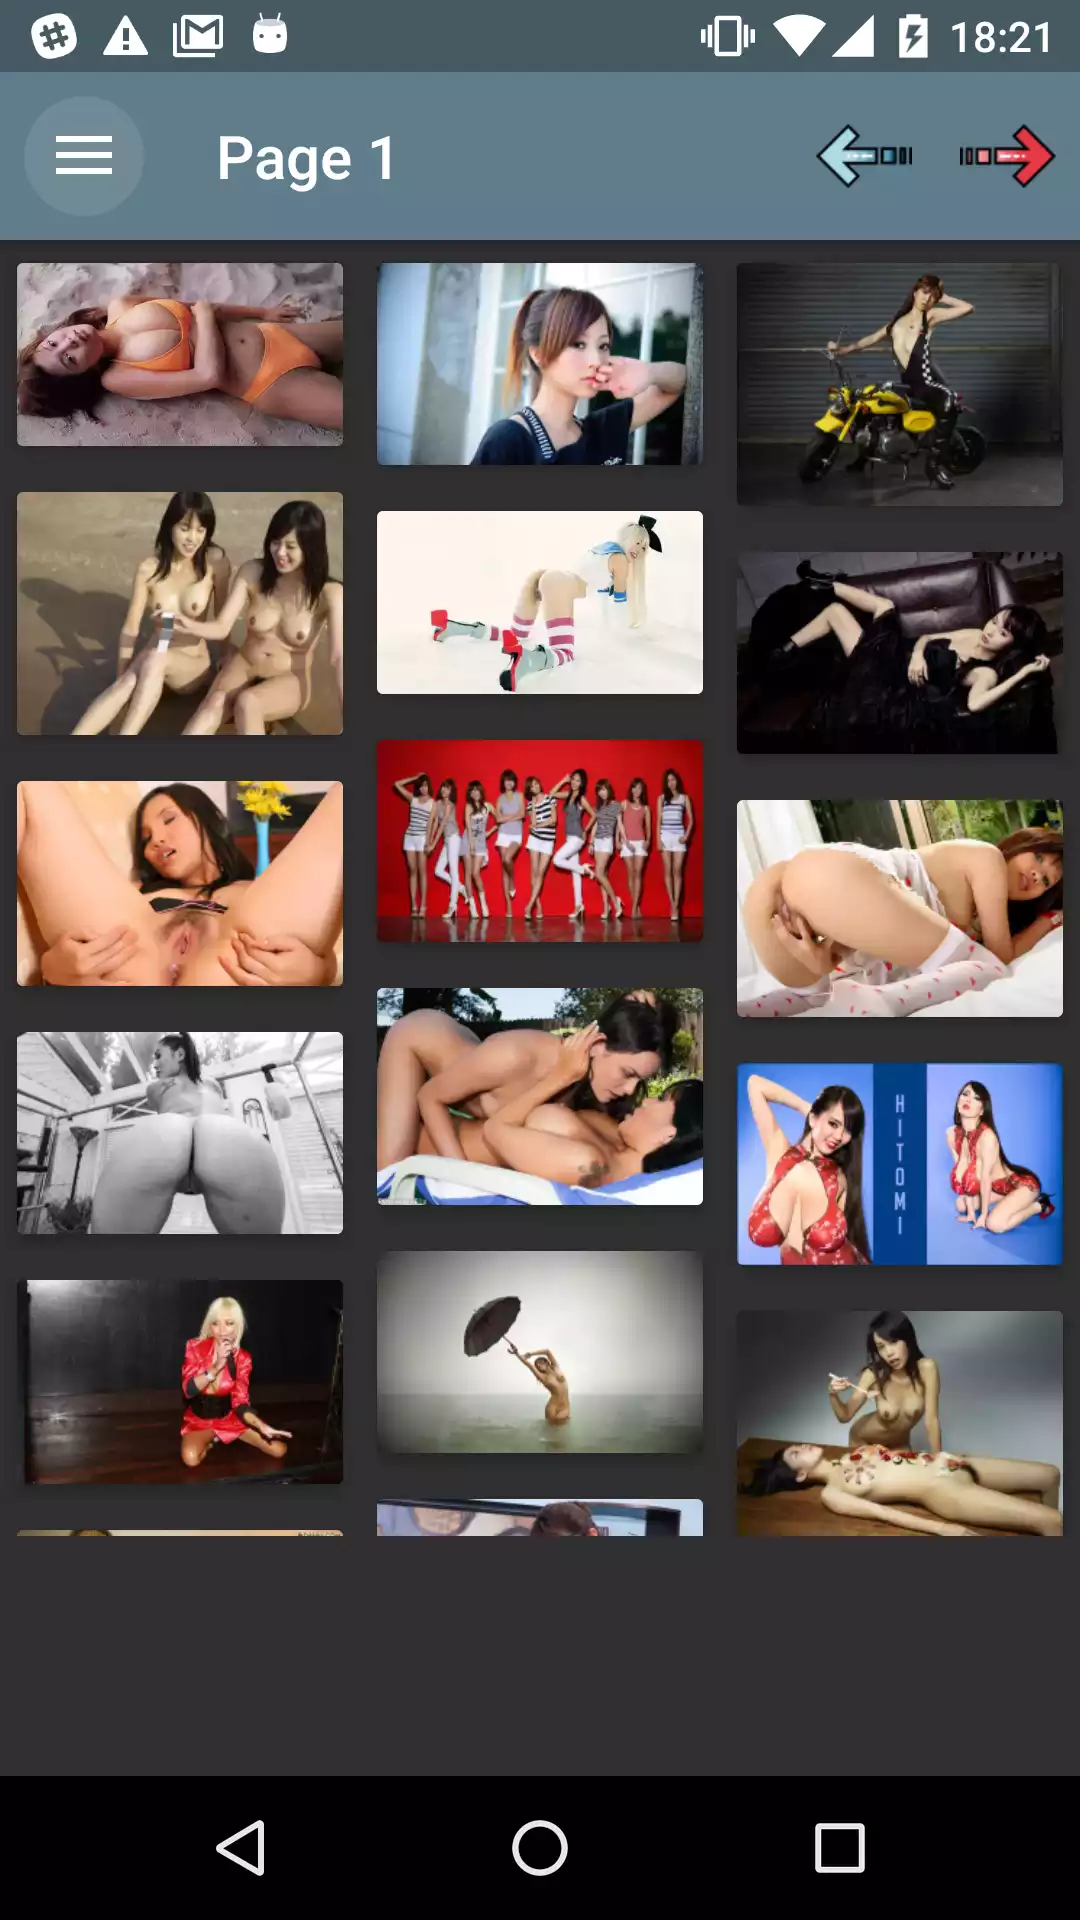 New Asian Wallpapers wallpapers,porn,best,pictures,photos,pegging,mature,app,gallery,new,backgrounds,comix,sexy,hentai,femboy,apps,lair,hentia,harem,images,picks,manga,apk,mythras